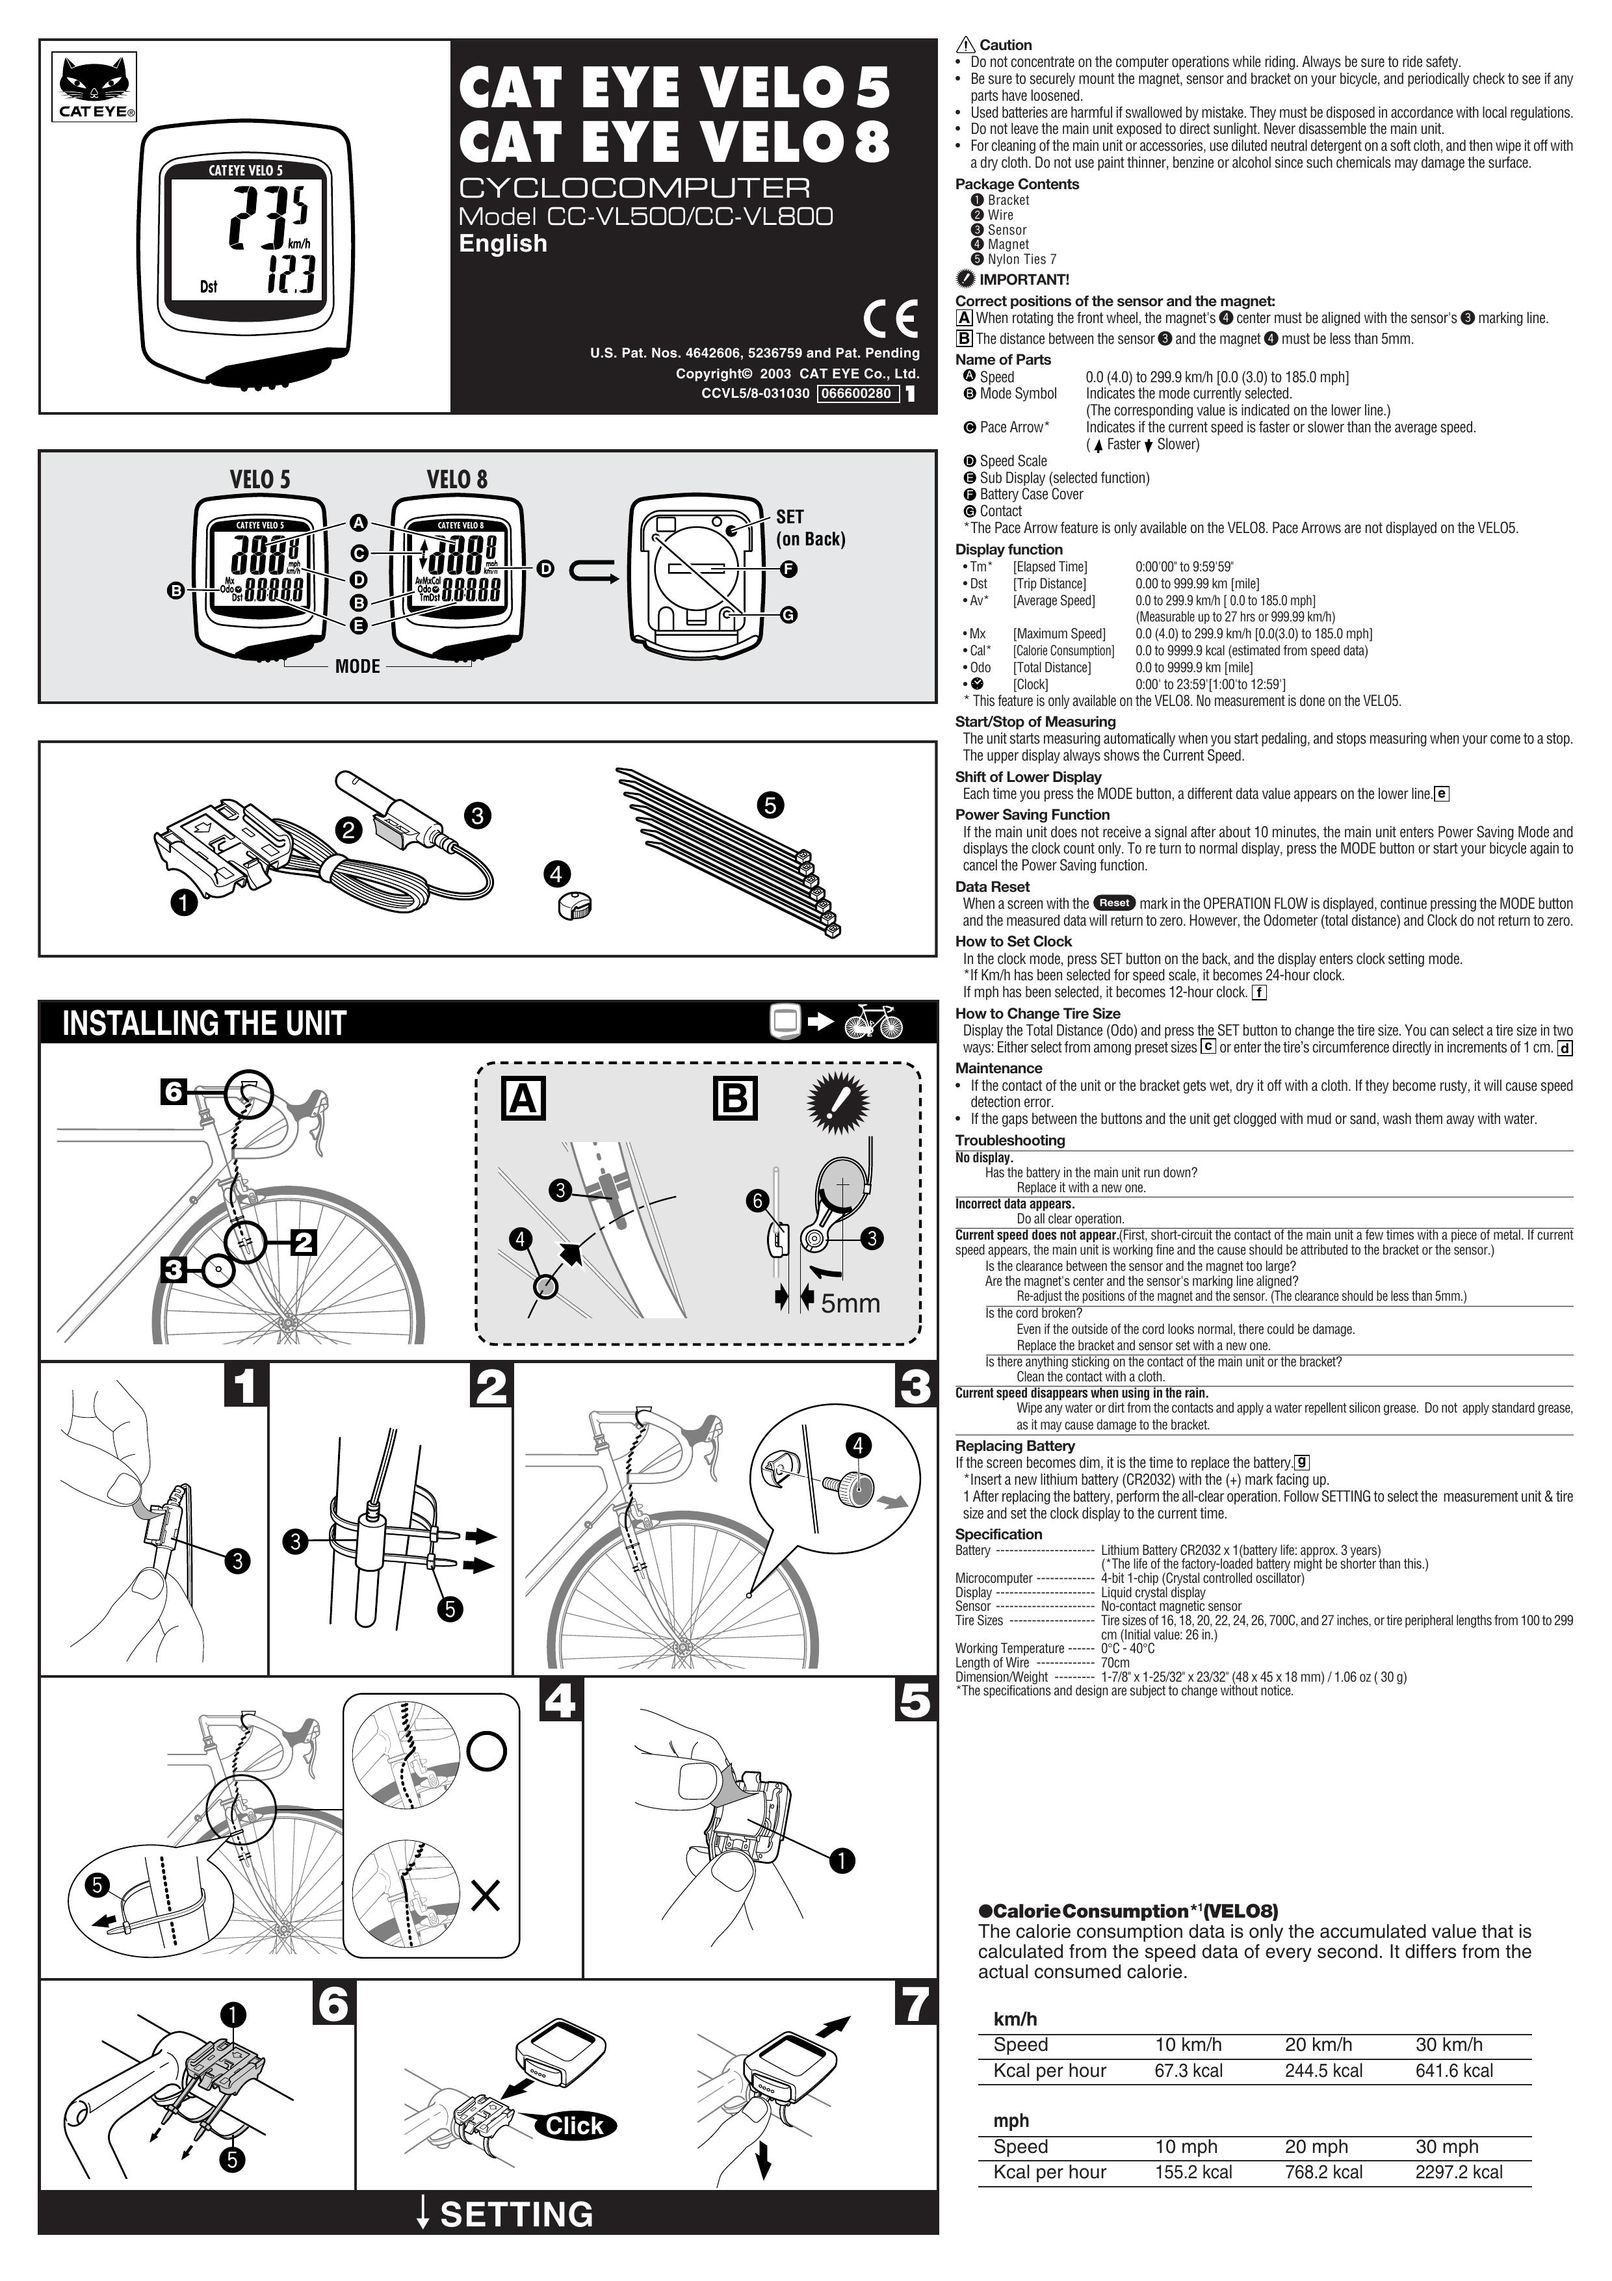 Cateye CC-VL800 Bicycle Accessories User Manual